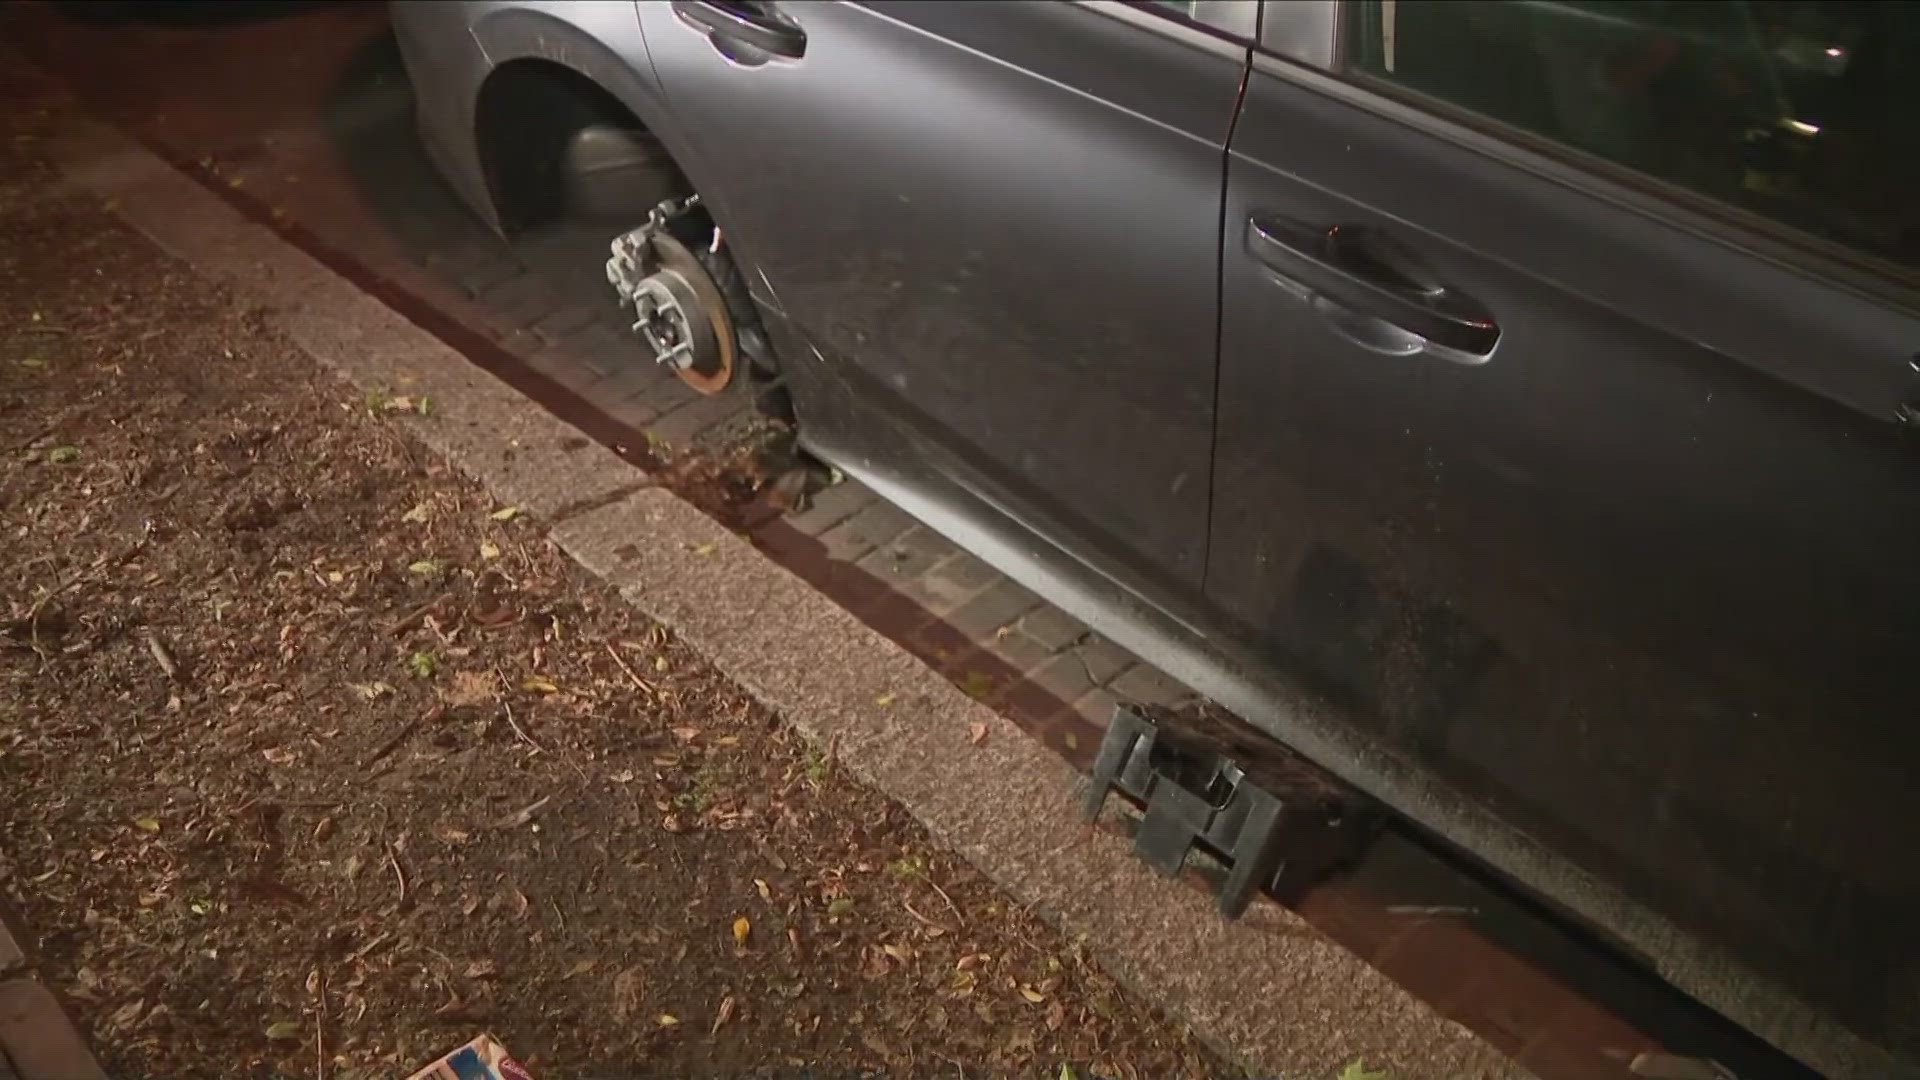 In less than 15 minutes, thieves steal all four wheels from a car parked in a driveway in Fort Washington.